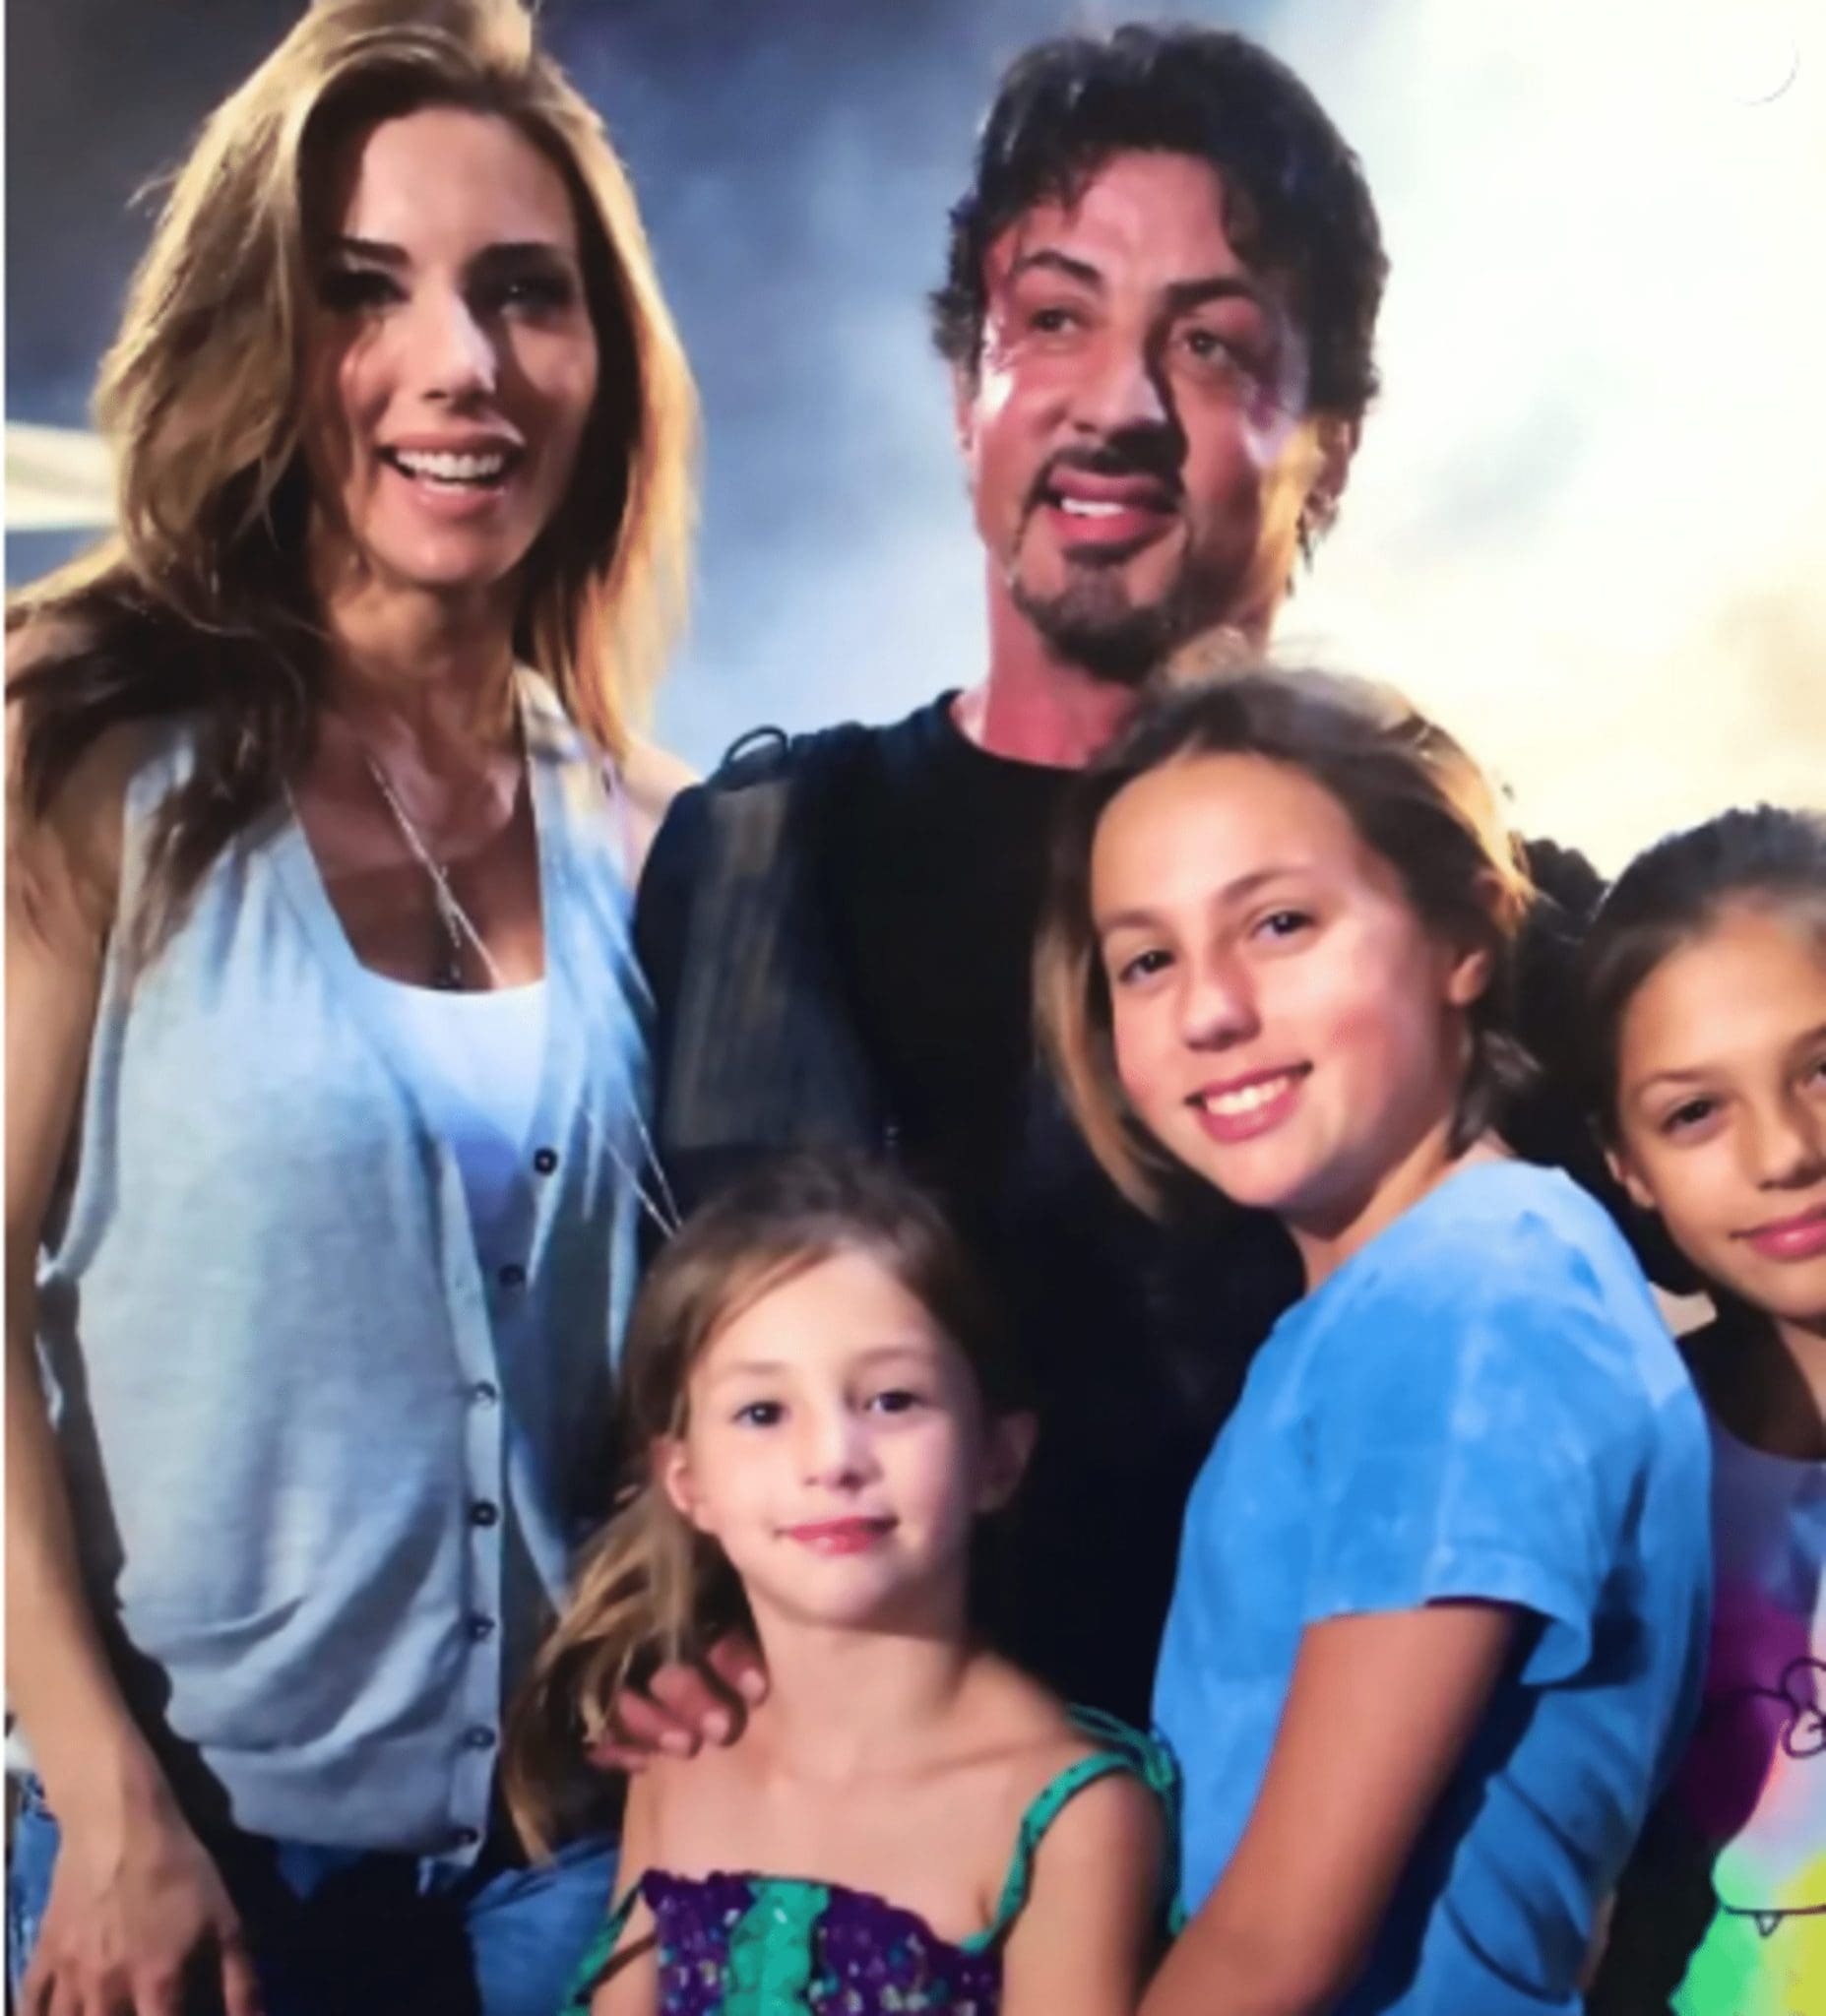 Pictures Of Sylvester Stallone And His Divorced Wife Jennifer Flavin Surfaced Online